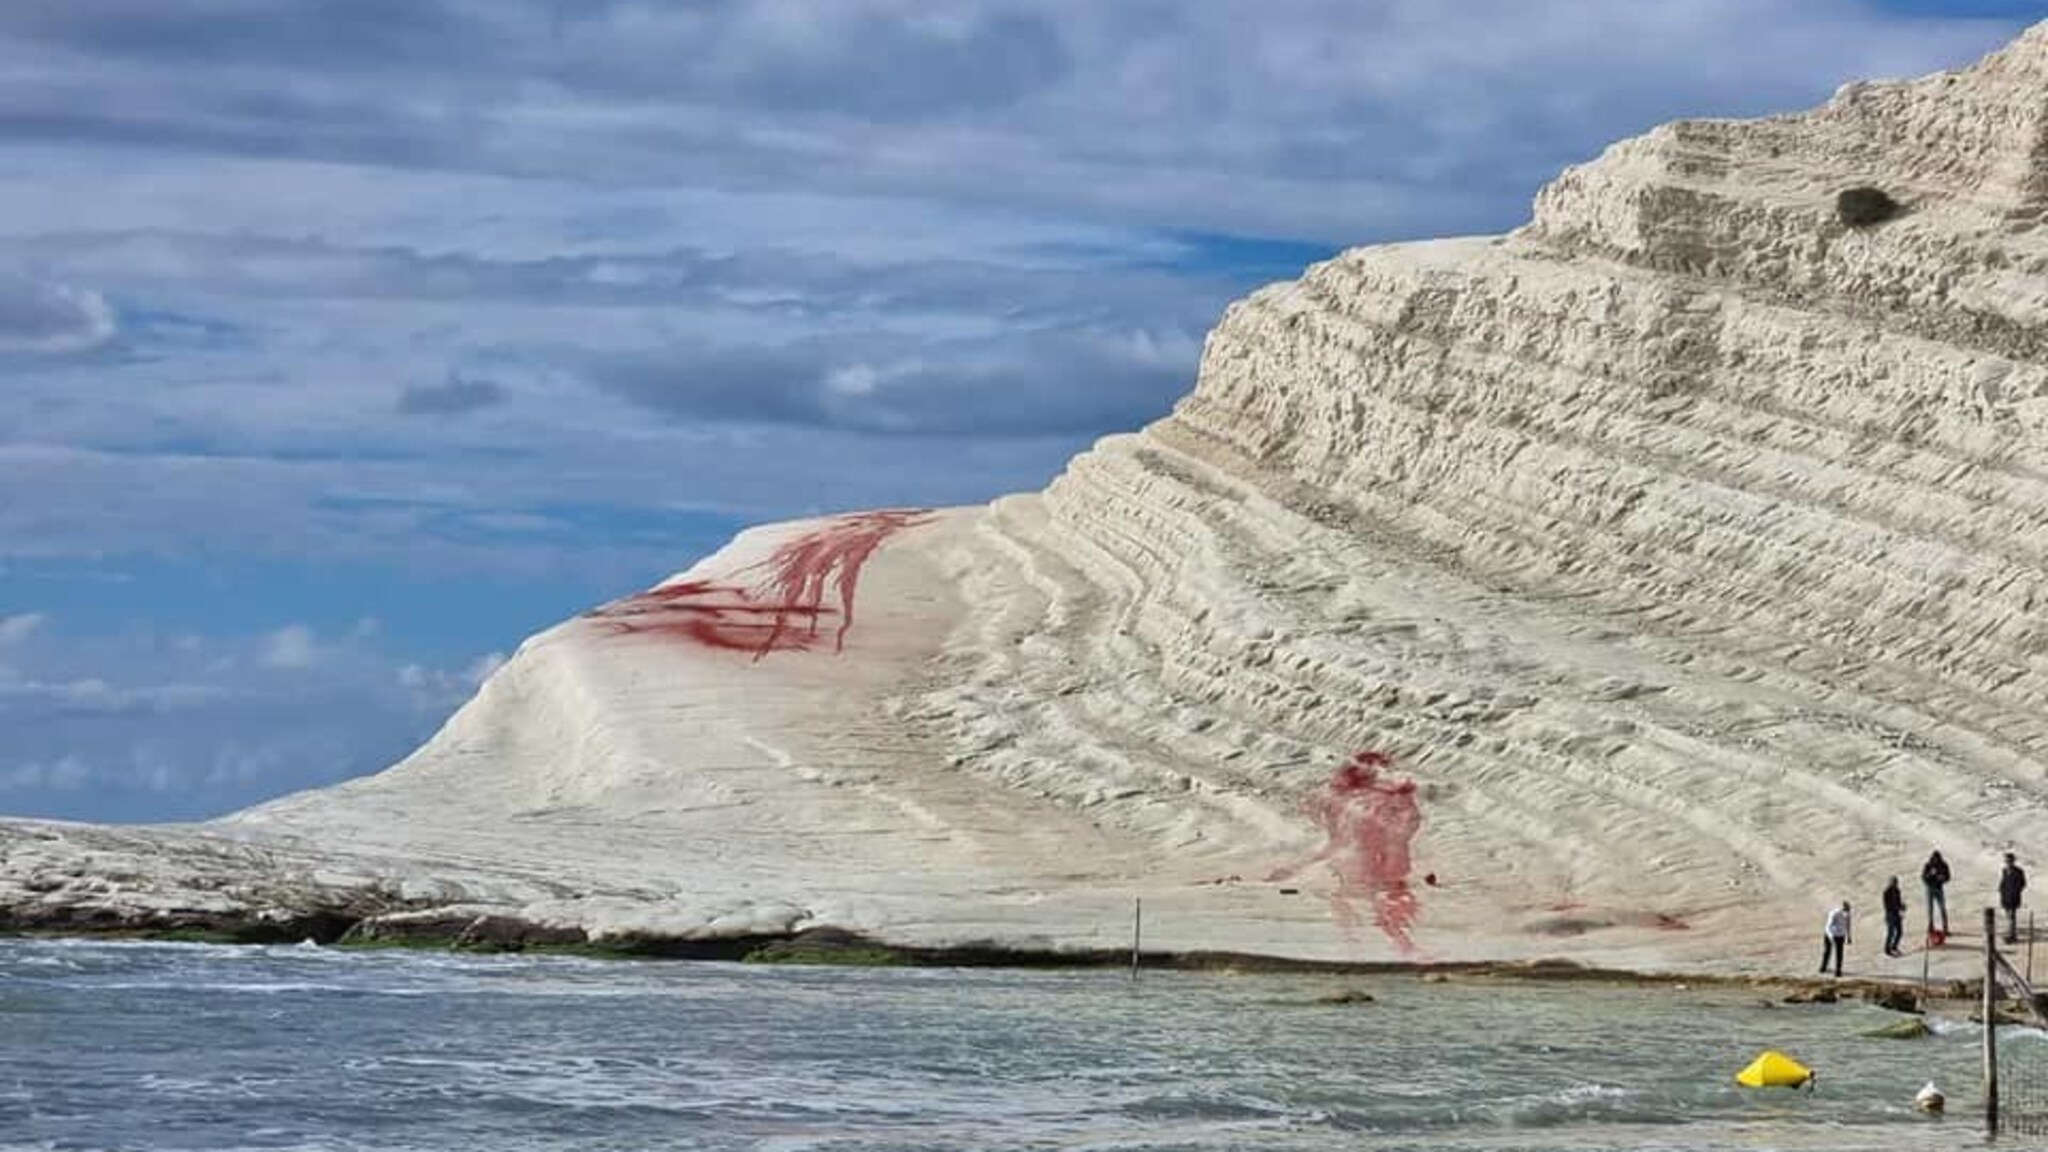 A famous Italian cliff was defaced with red powder by vandals